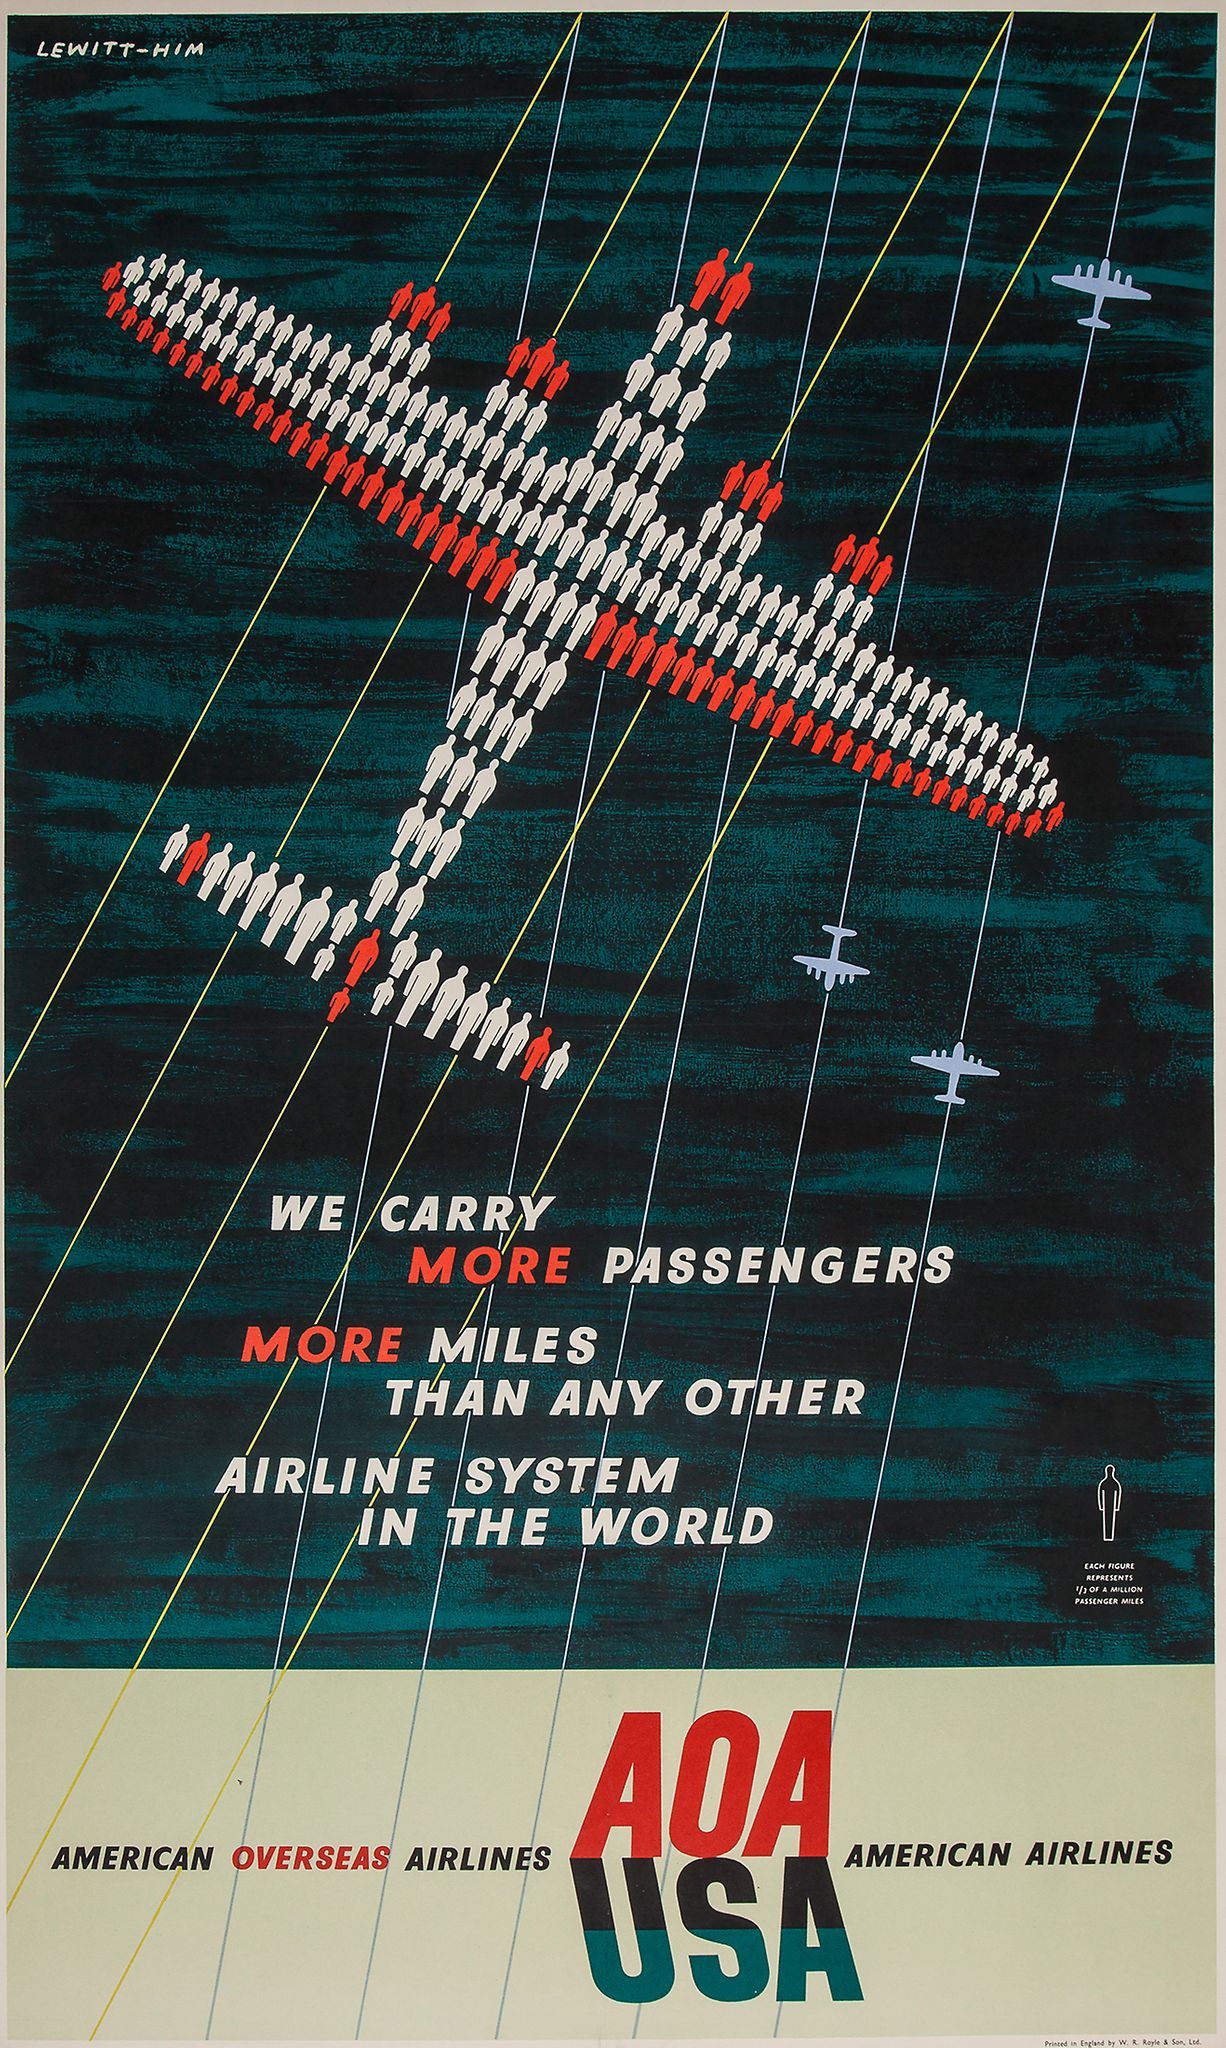 LEWITT-HIM - AOA USA, we carry more passengers.... lithographic poster in colours, pinted by W.R.